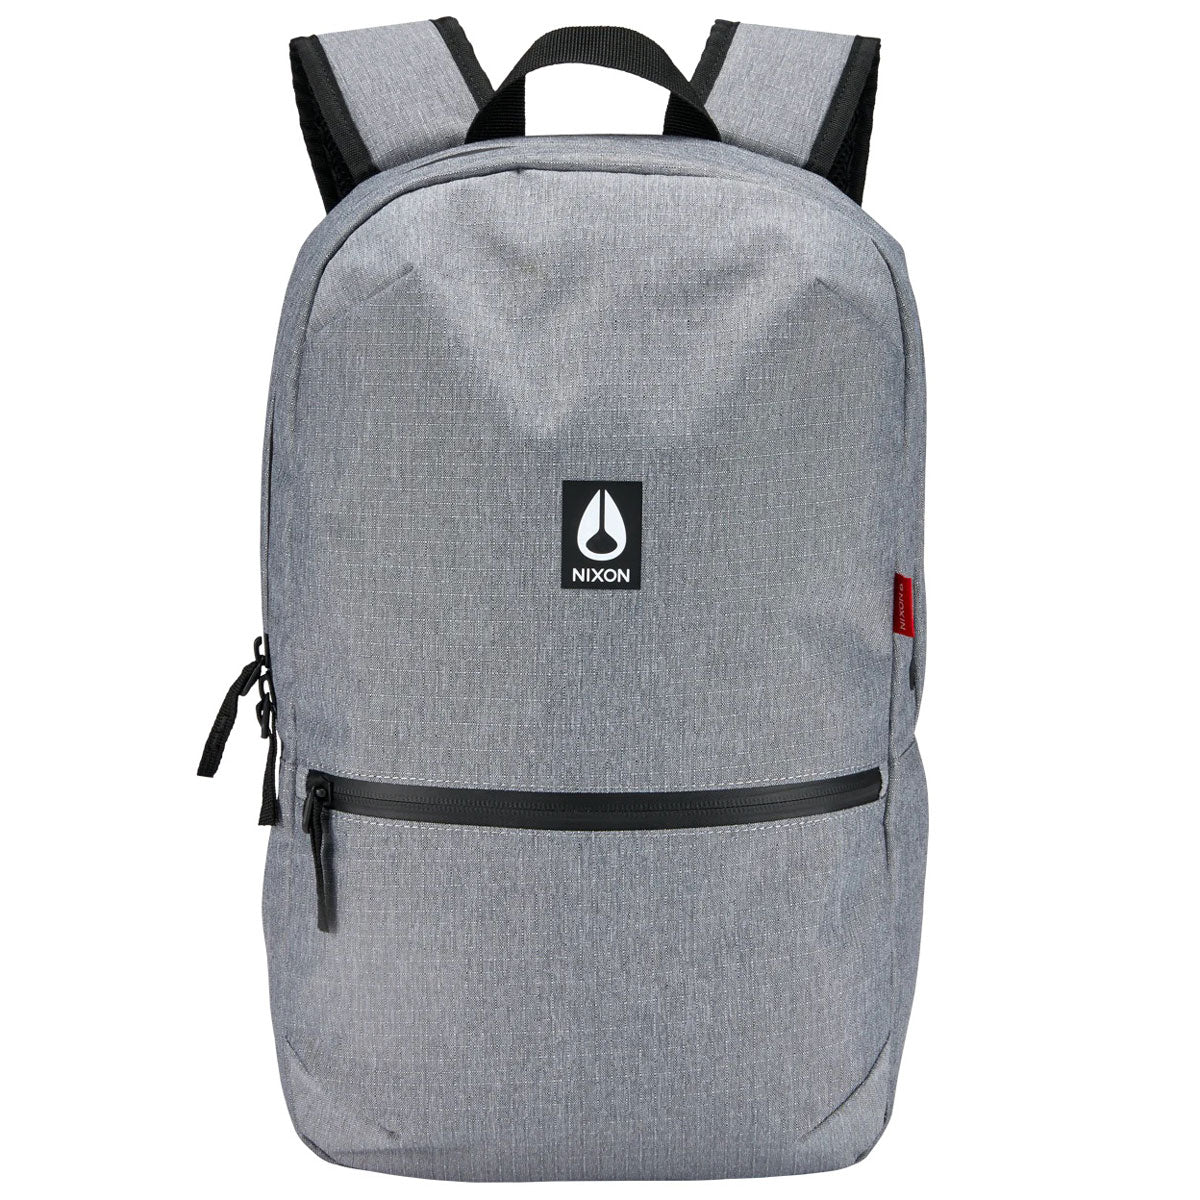 Nixon Day Trippin' Backpack - Heather Gray image 1